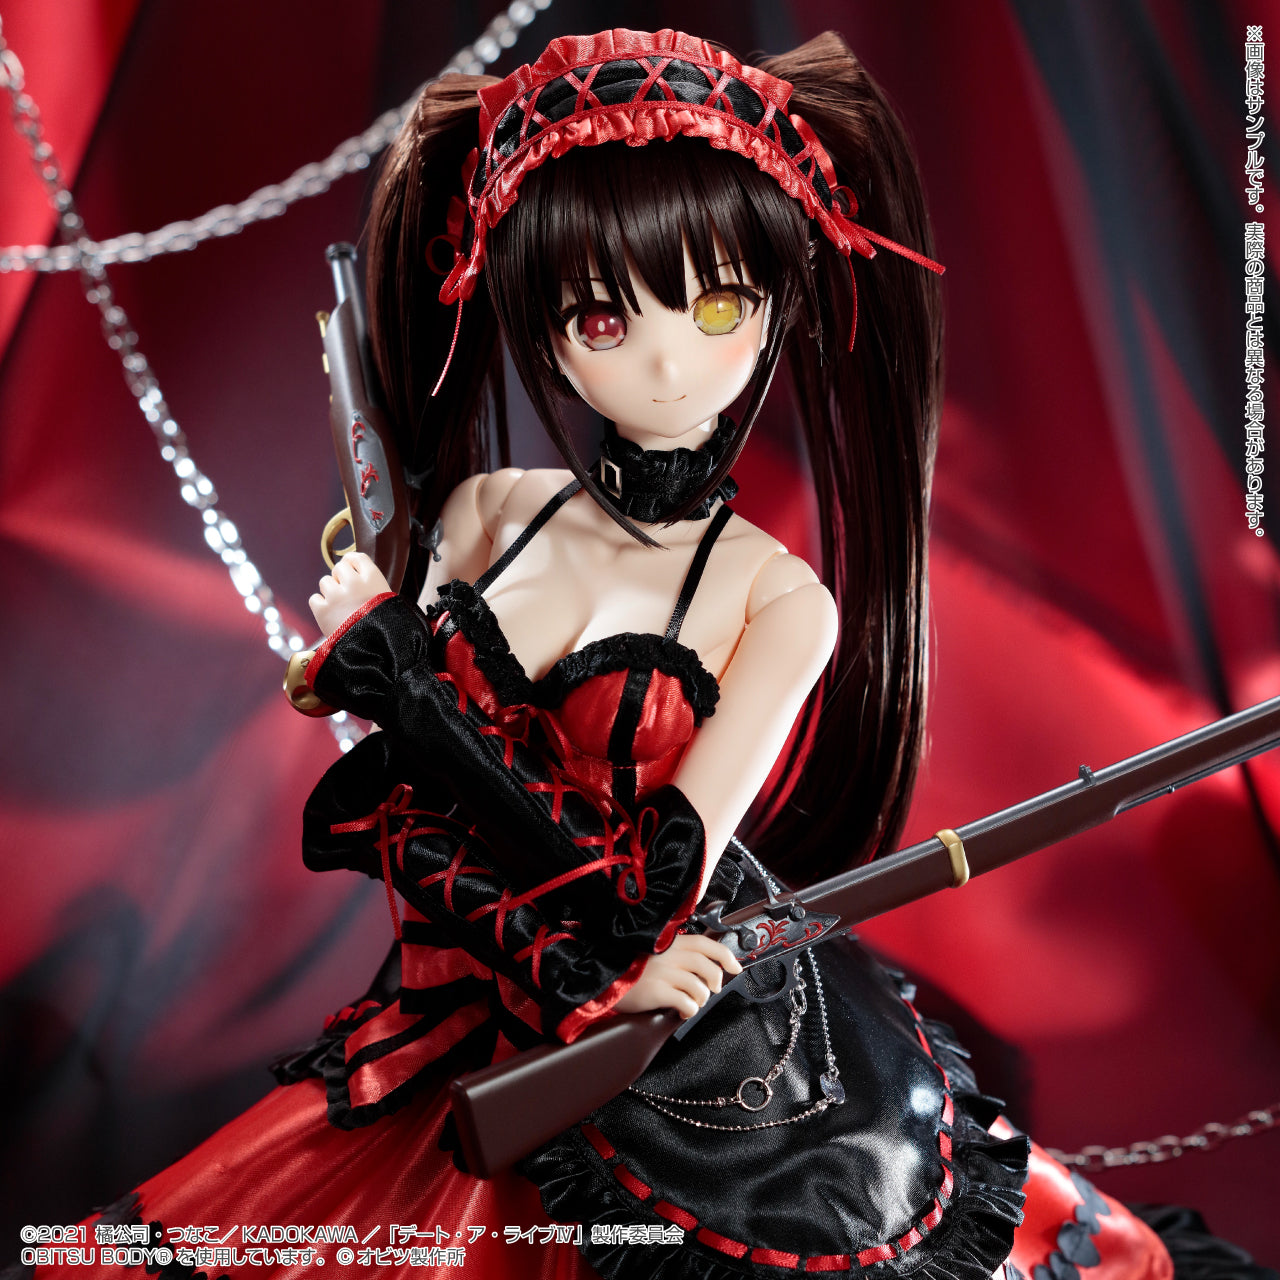 Anime Action Figure Date Live, Date Live Anime Characters